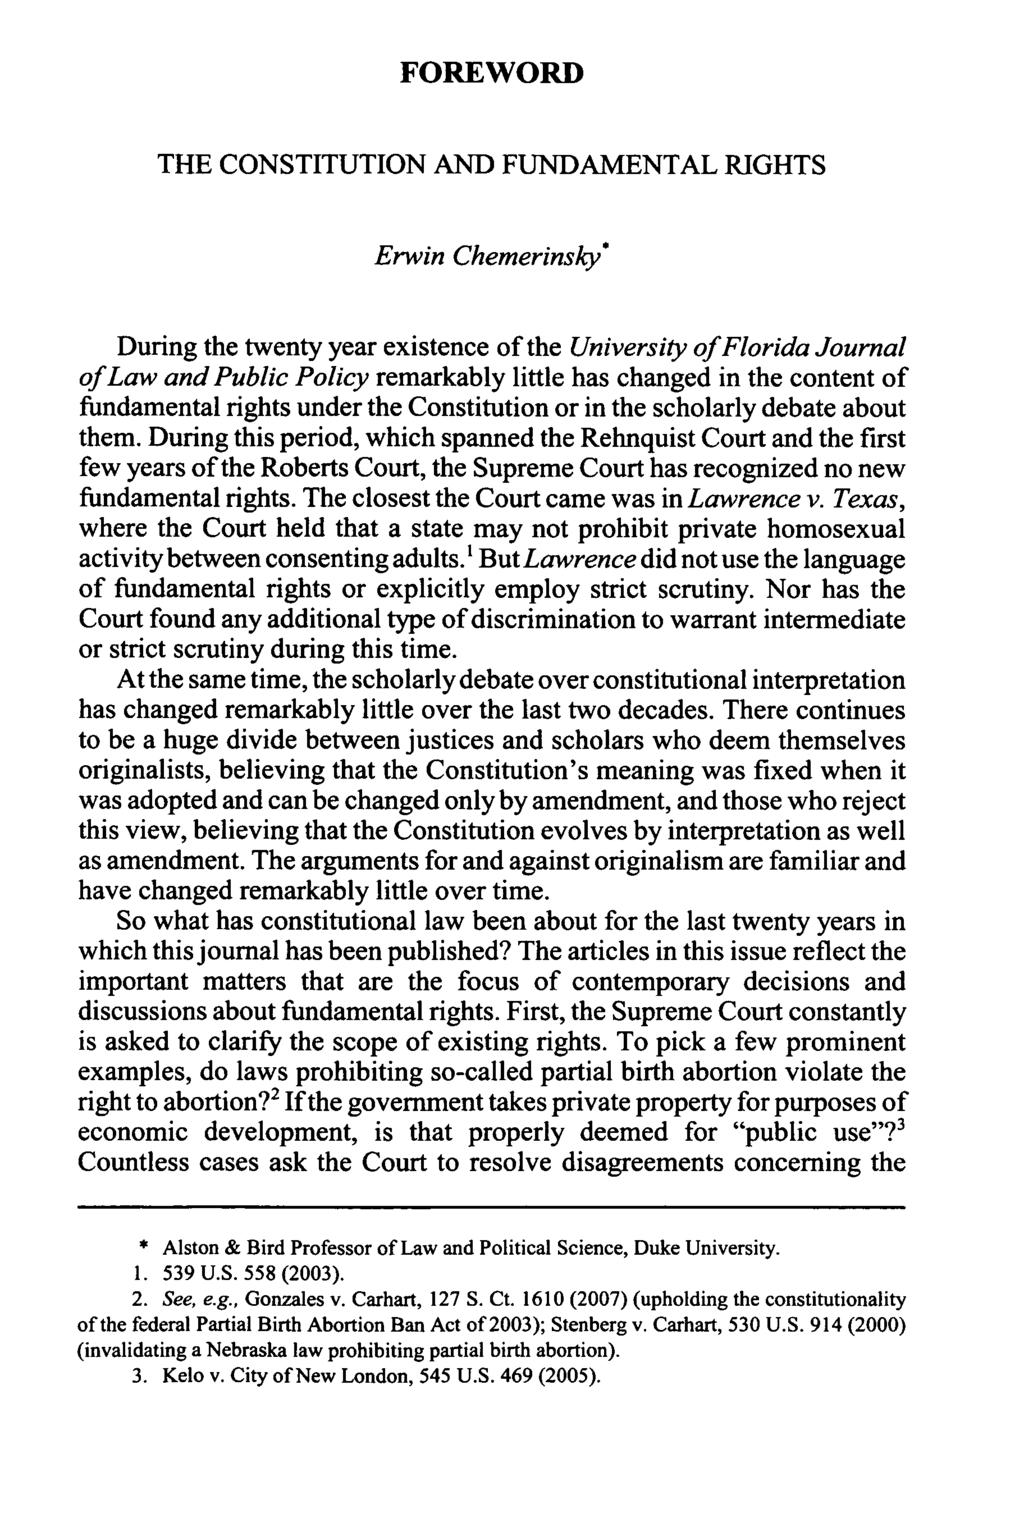 FOREWORD THE CONSTITUTION AND FUNDAMENTAL RIGHTS Erwin Chemerinsky" During the twenty year existence of the University of Florida Journal of Law and Public Policy remarkably little has changed in the